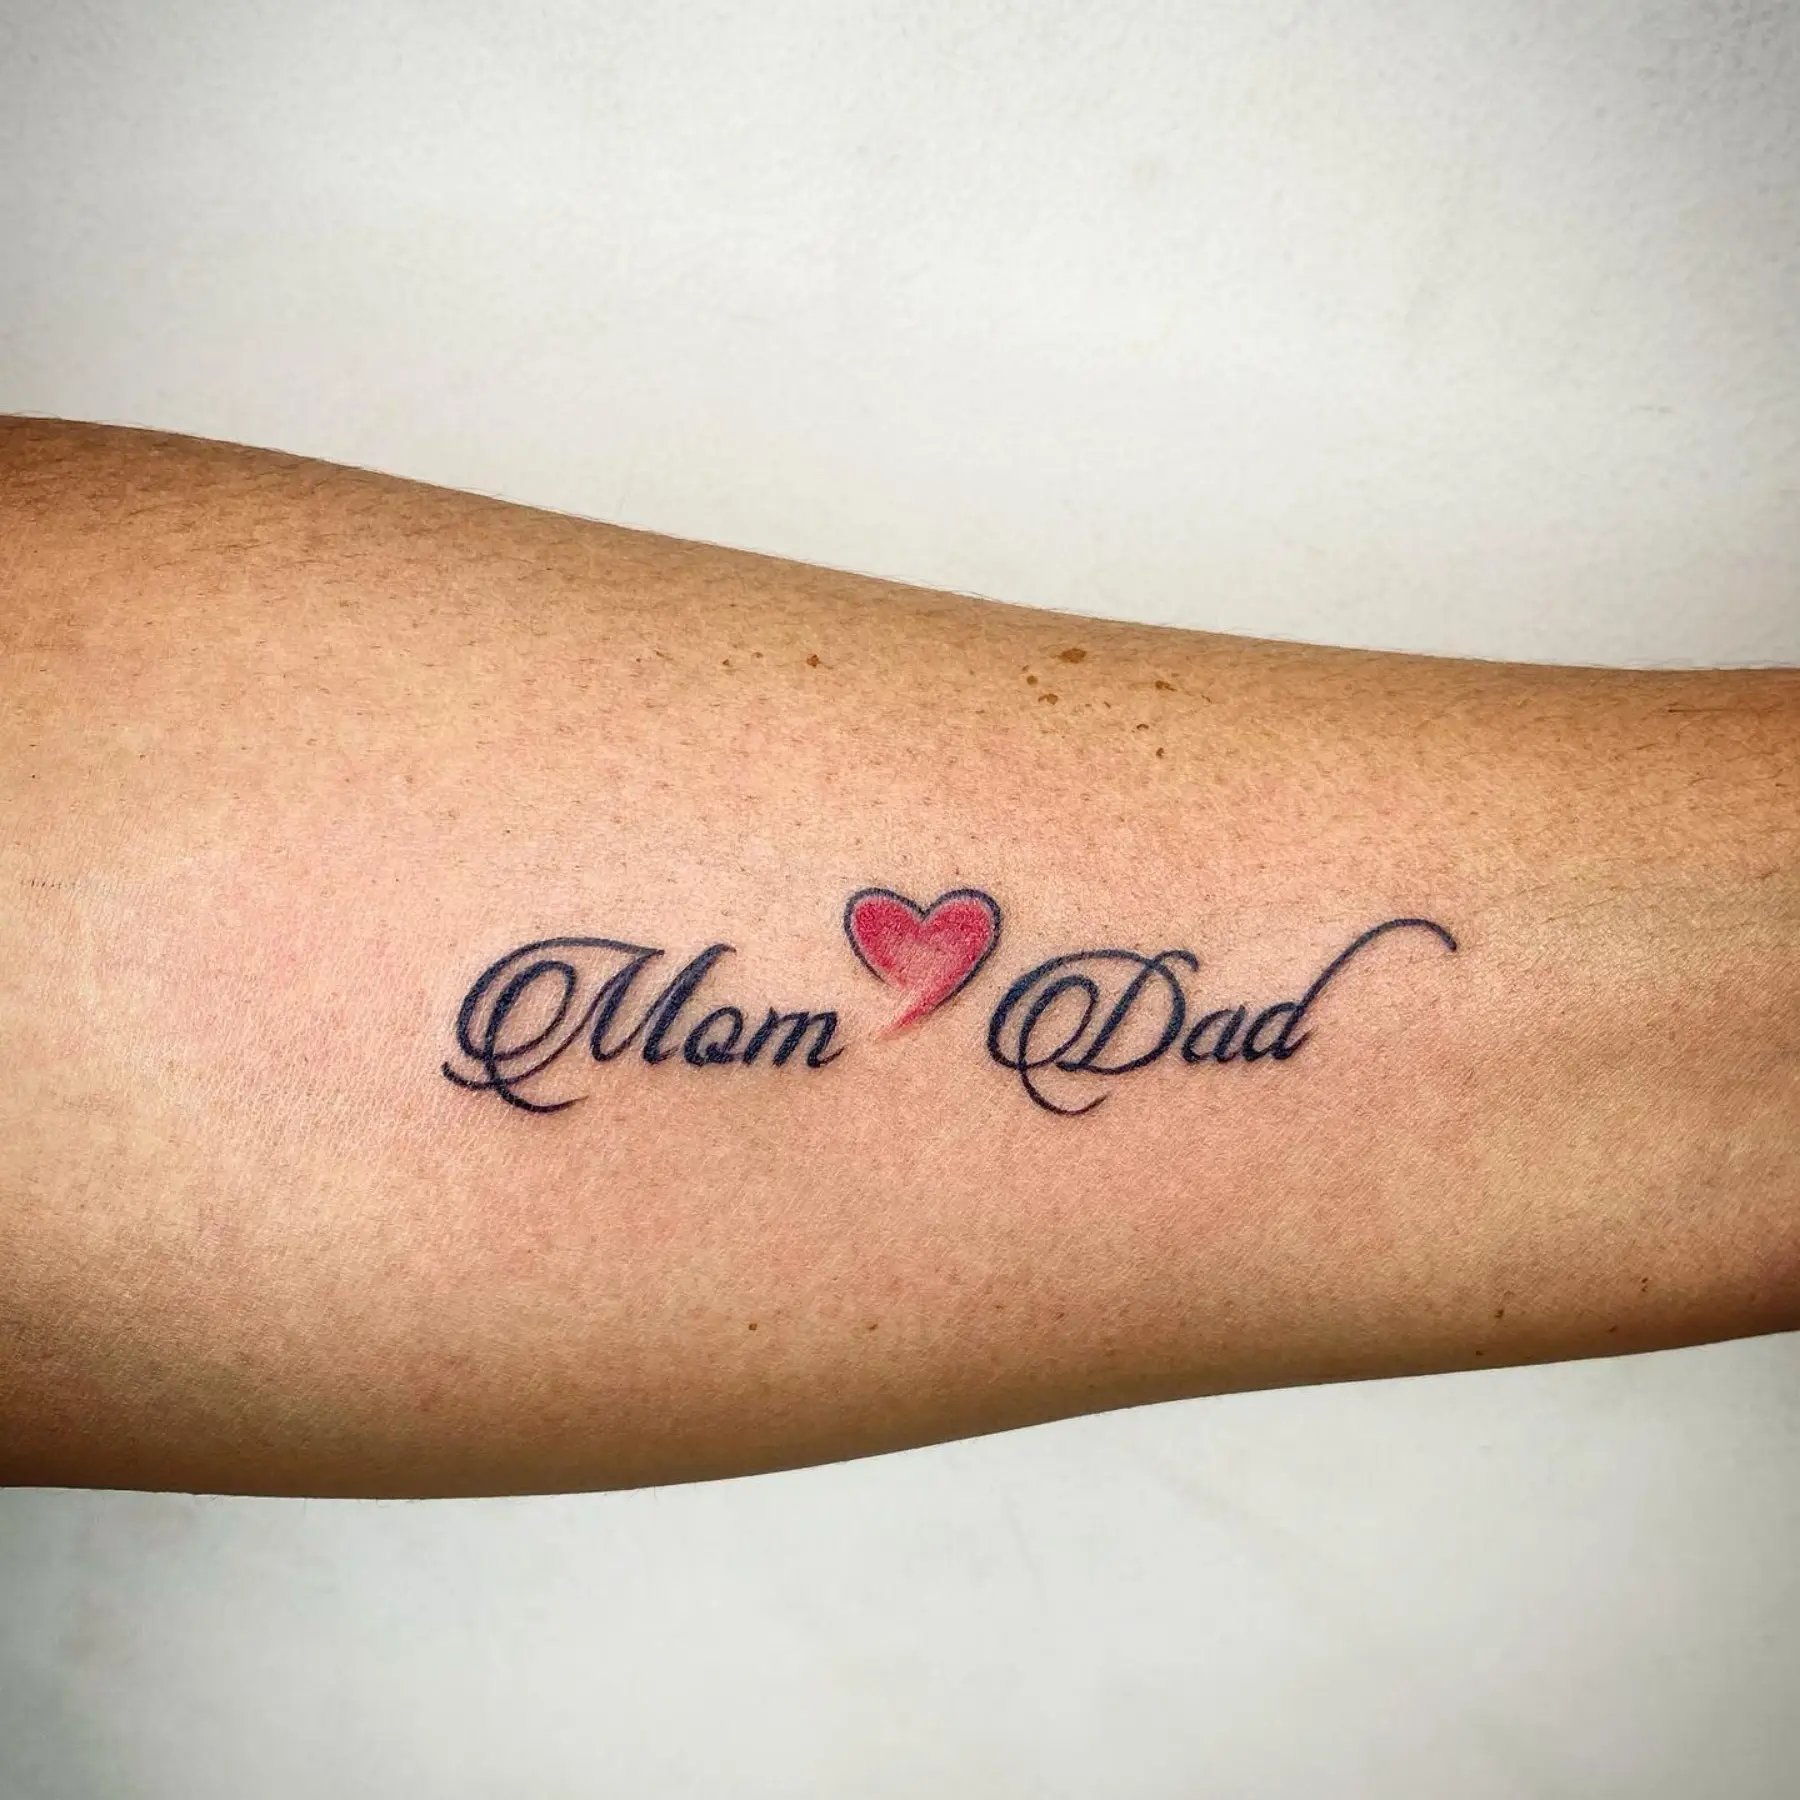 Mom dad tattoo inner forearms